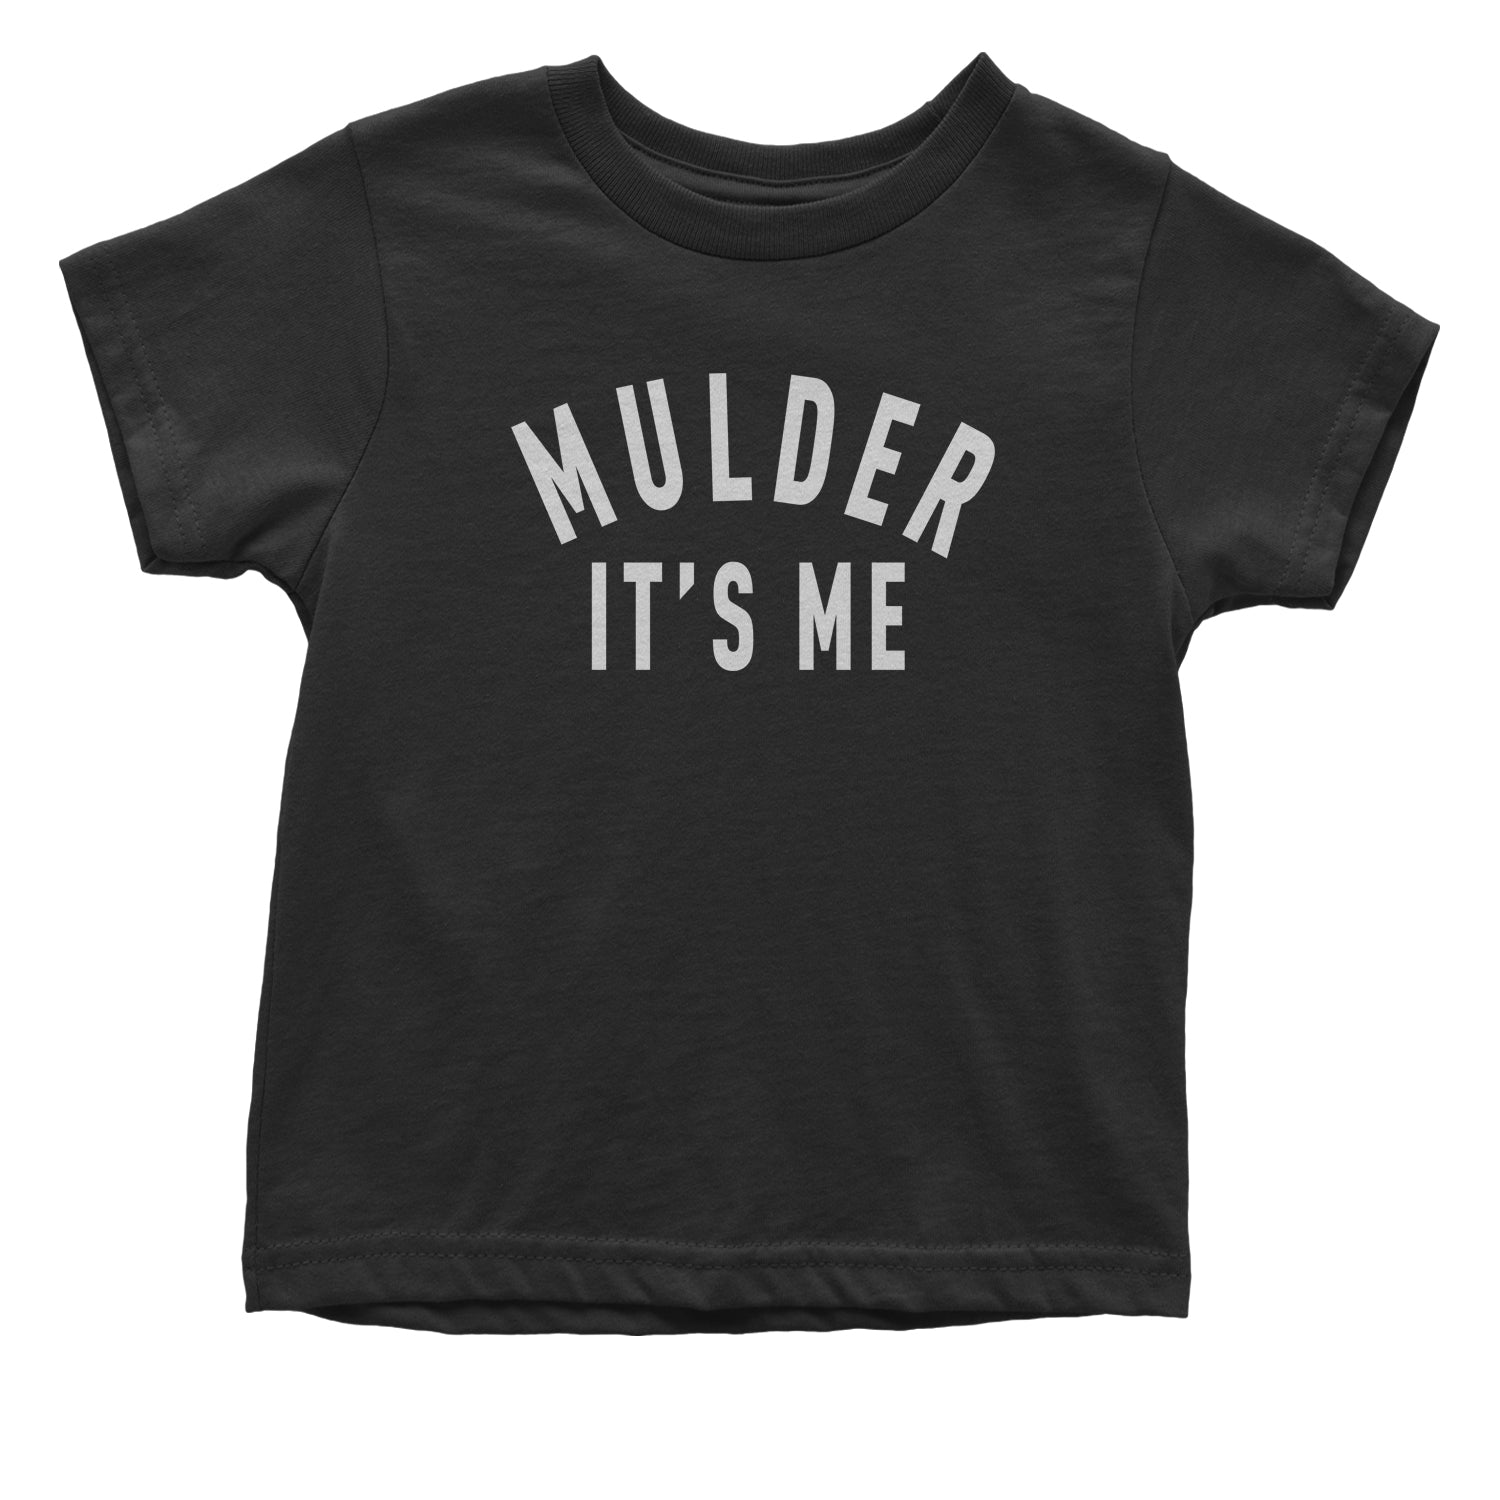 Mulder, It's Me Toddler T-Shirt 51, area, believe, files, is, mulder, out, scully, the, there, truth, x, xfiles by Expression Tees